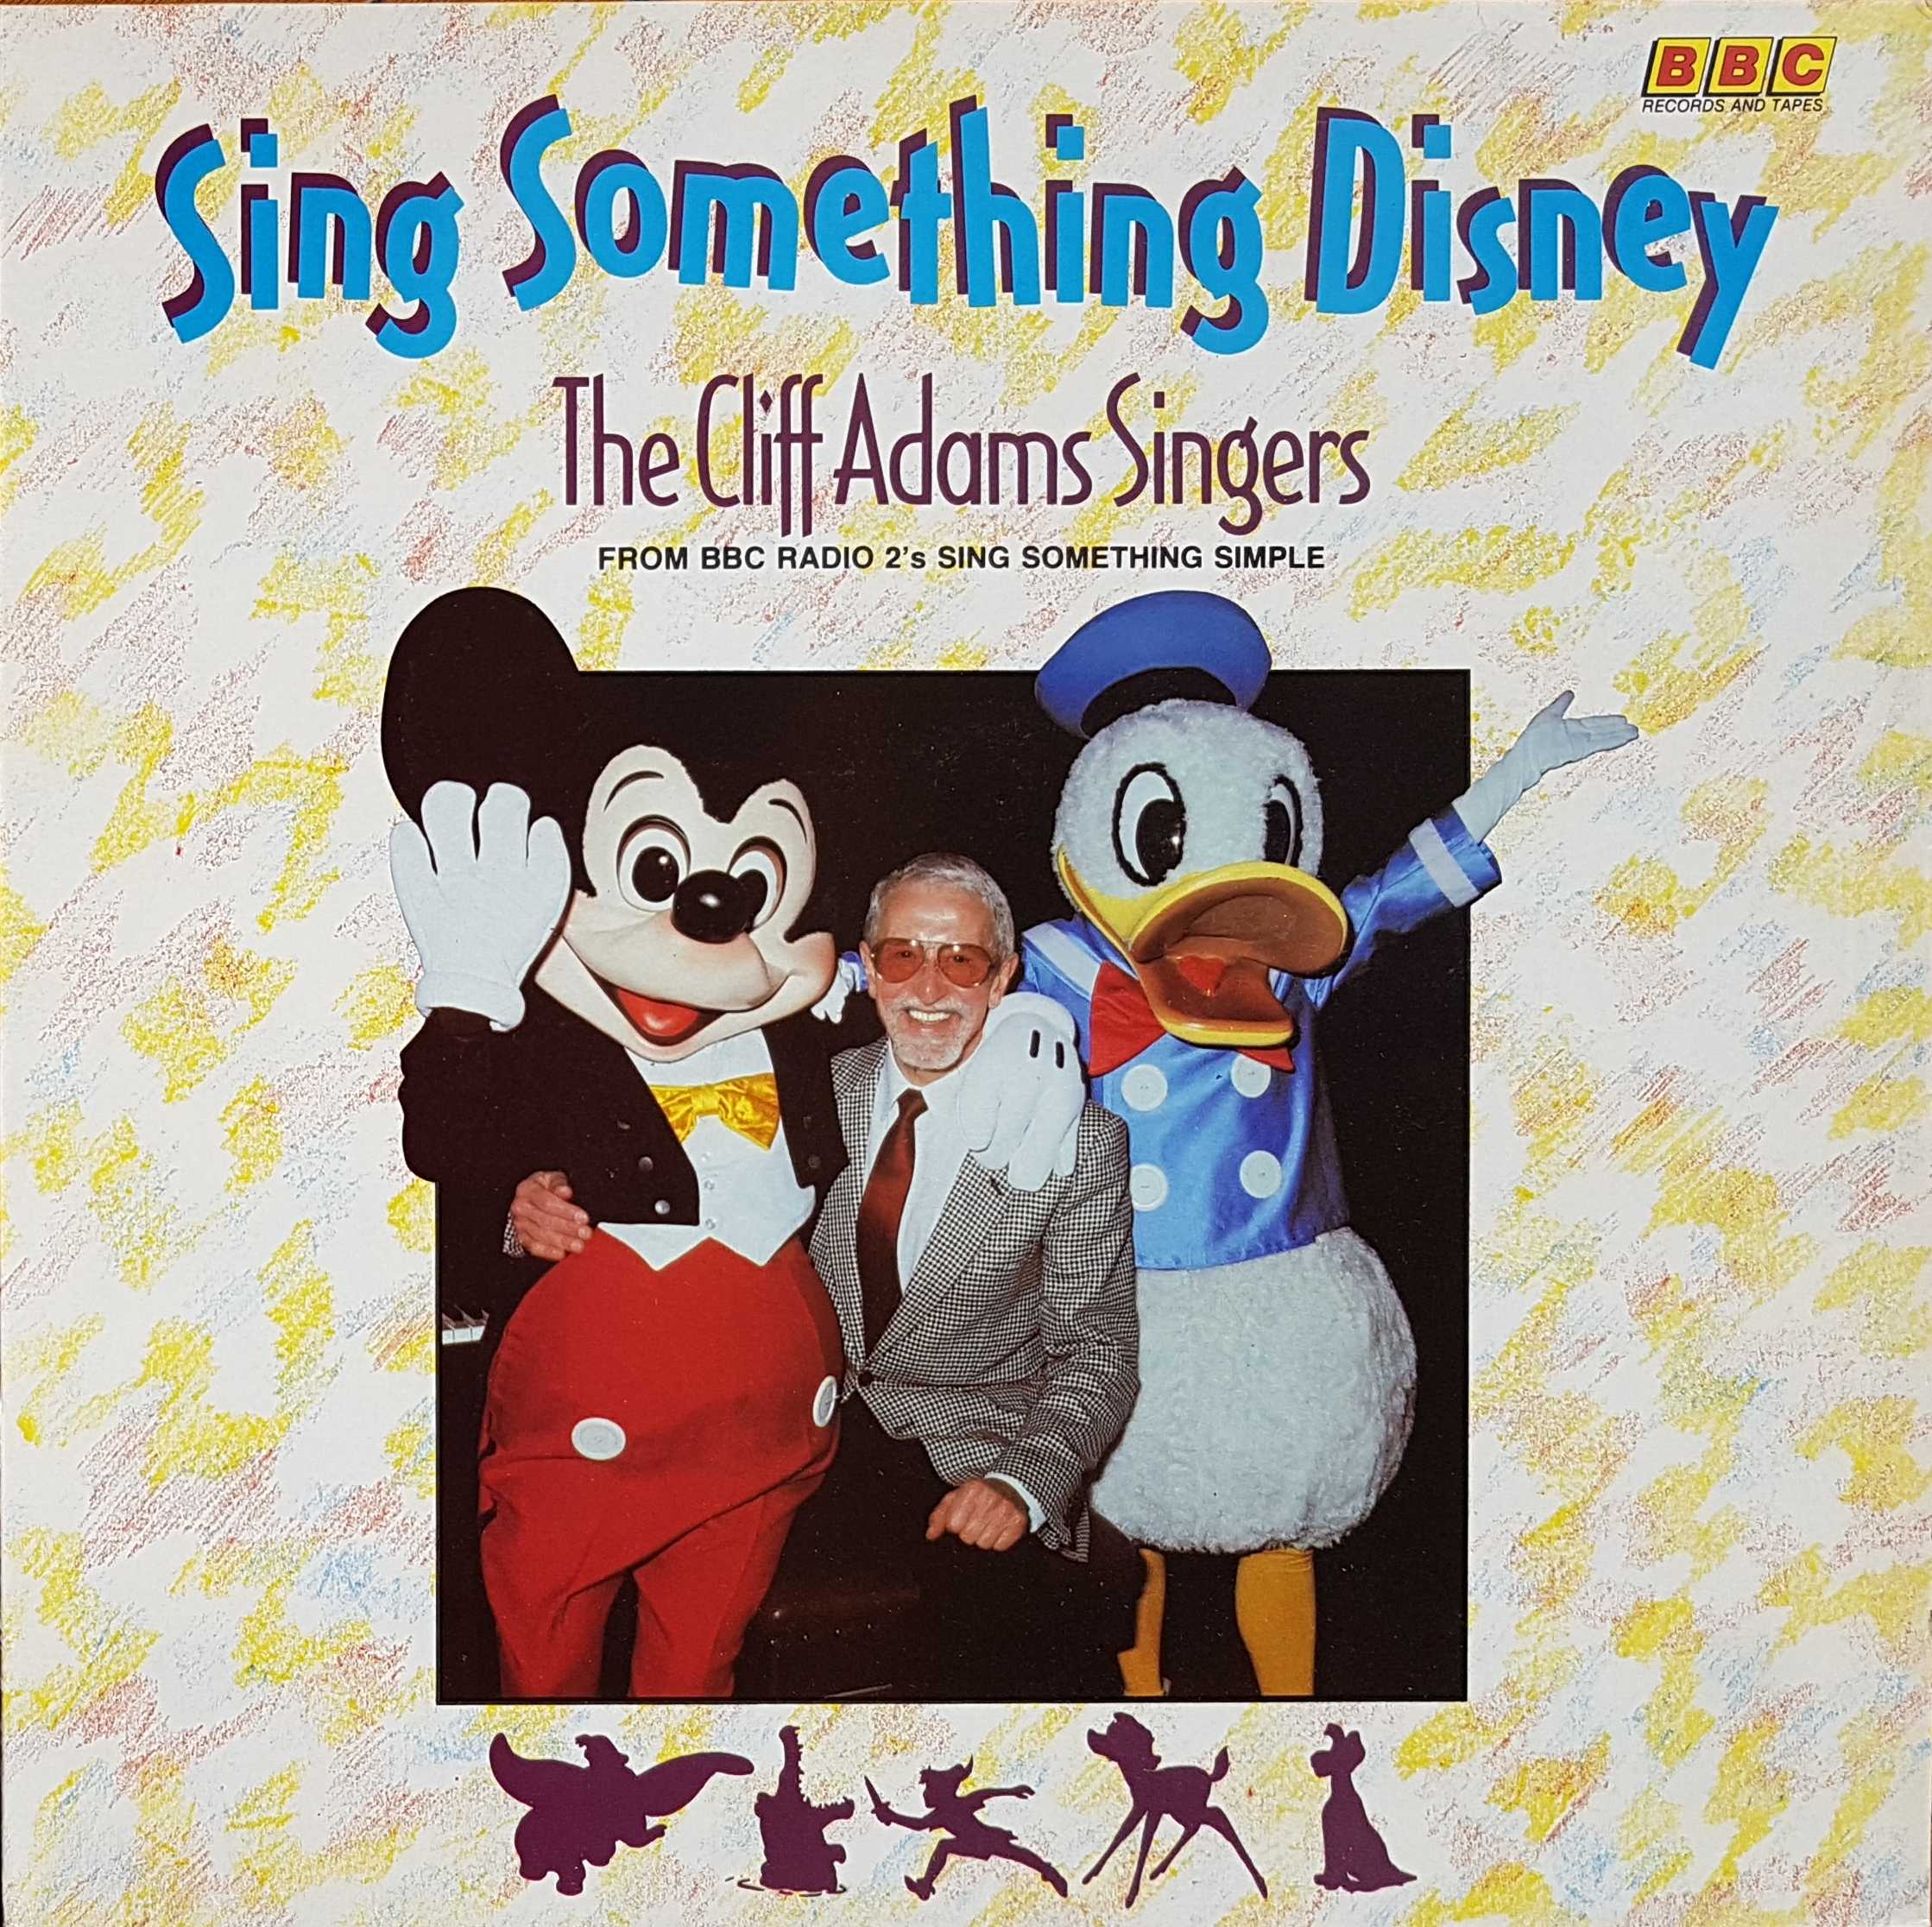 Picture of REH 574 Sing something Disney by artist Various from the BBC albums - Records and Tapes library